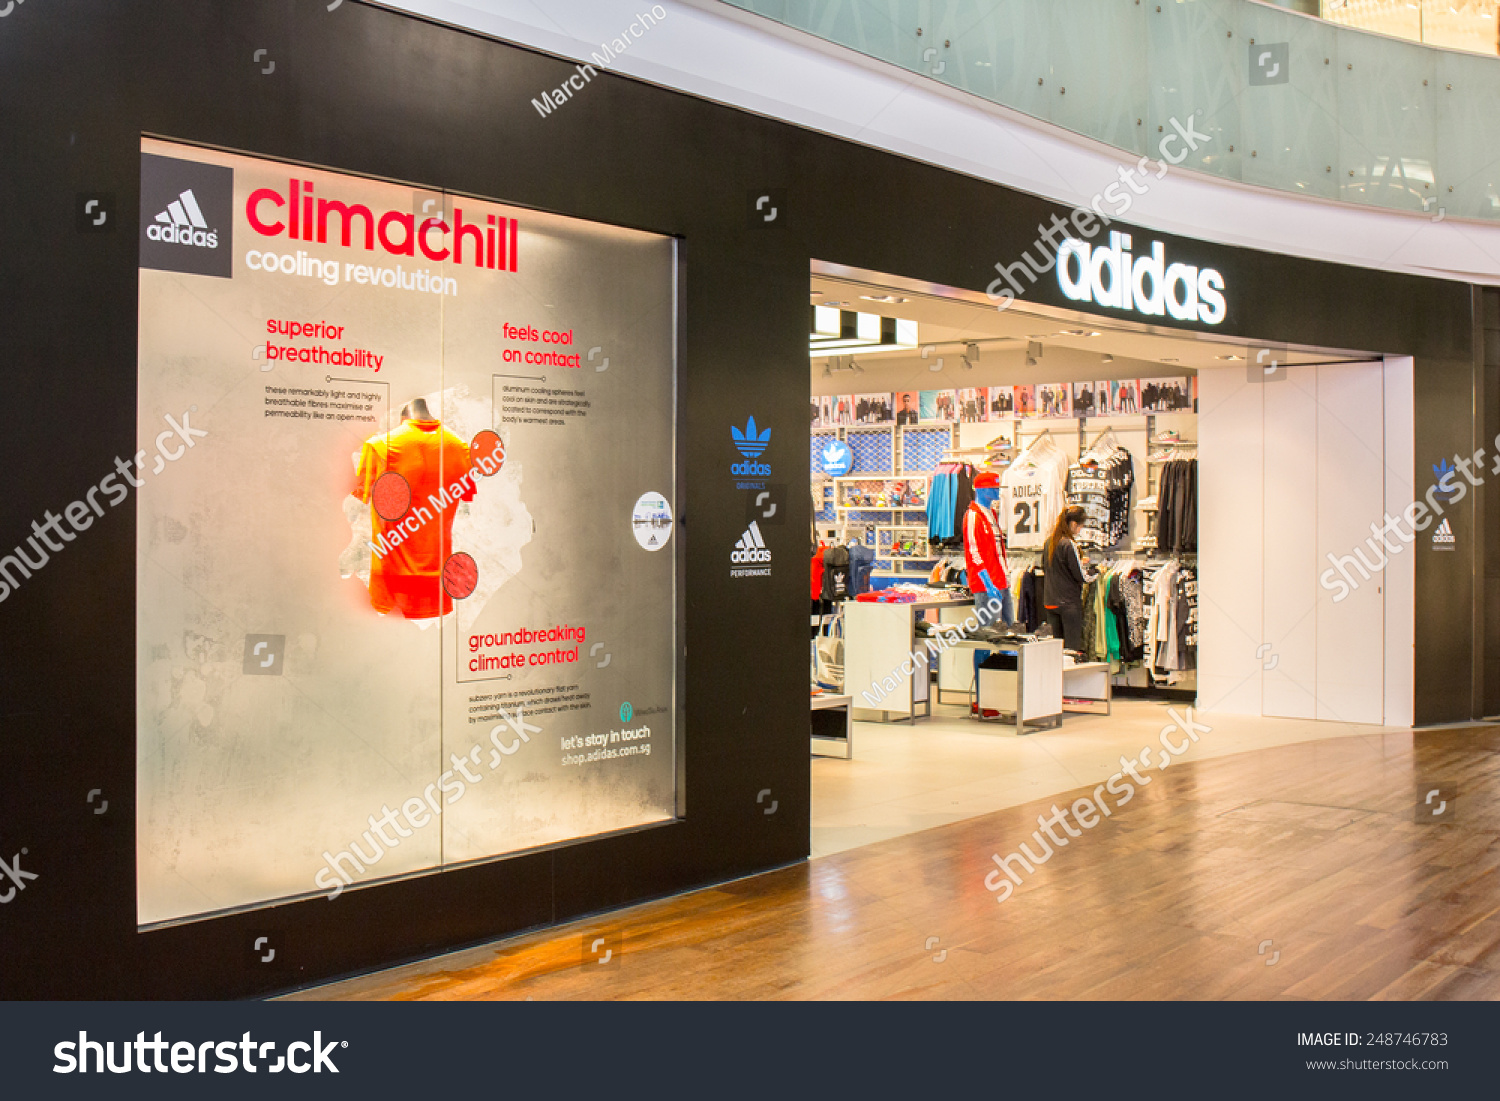 adidas outlet orchard